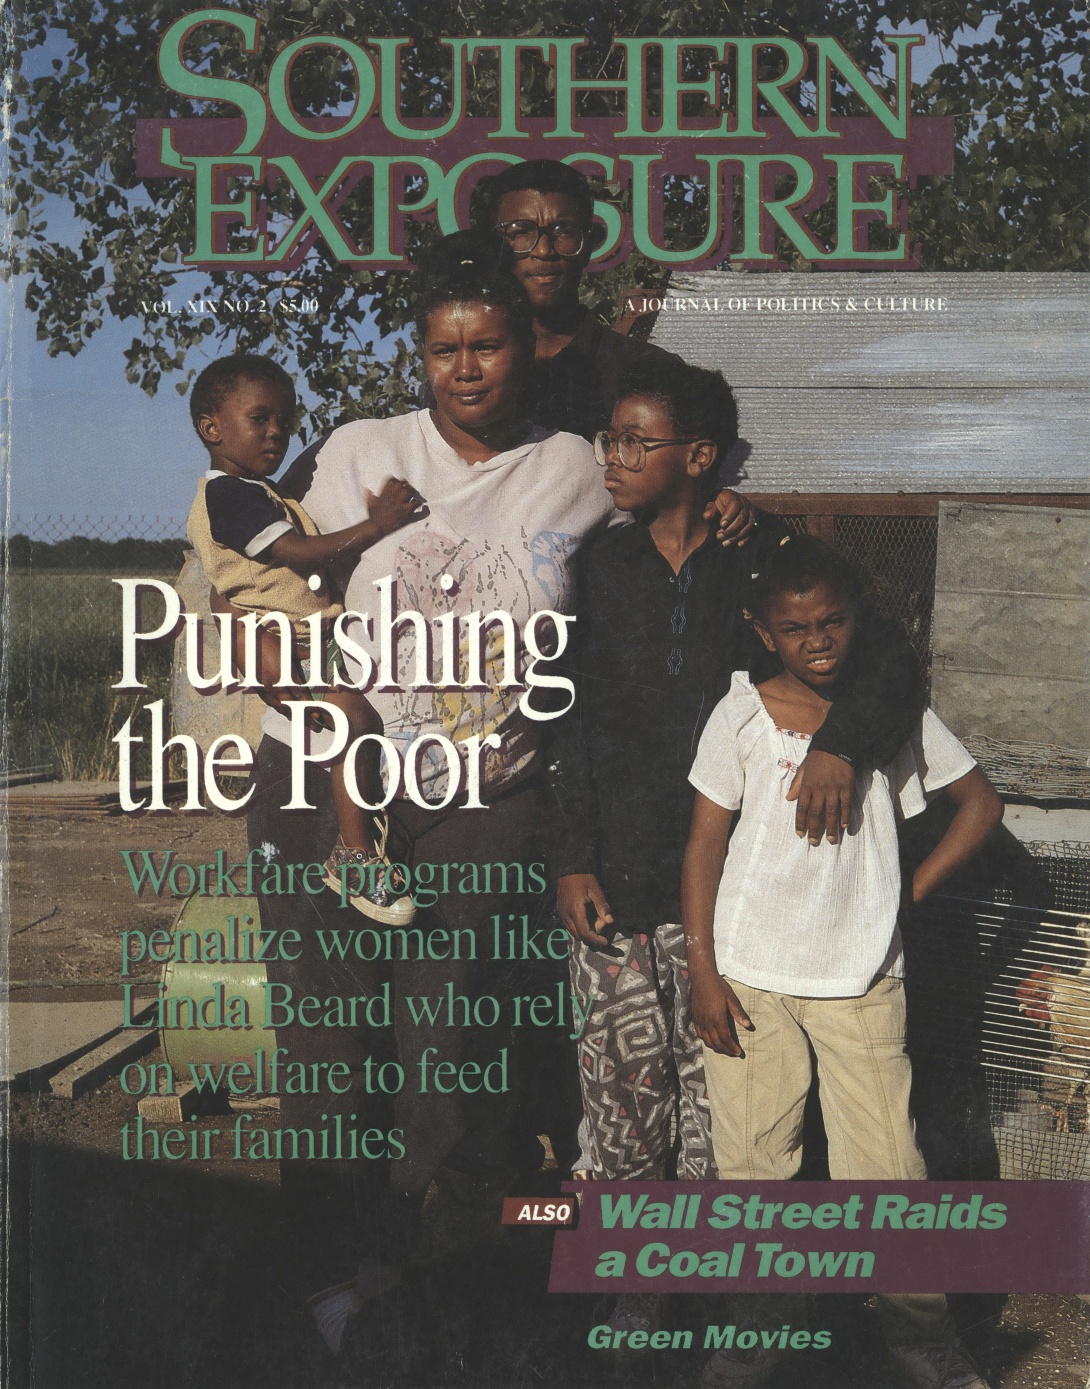 Magazine cover showing Black family standing outside in front of a chicken house. Text reads "Punishing the Poor: Workfare programs penalize women like Linda Beard who rely on welfare to feed their families."